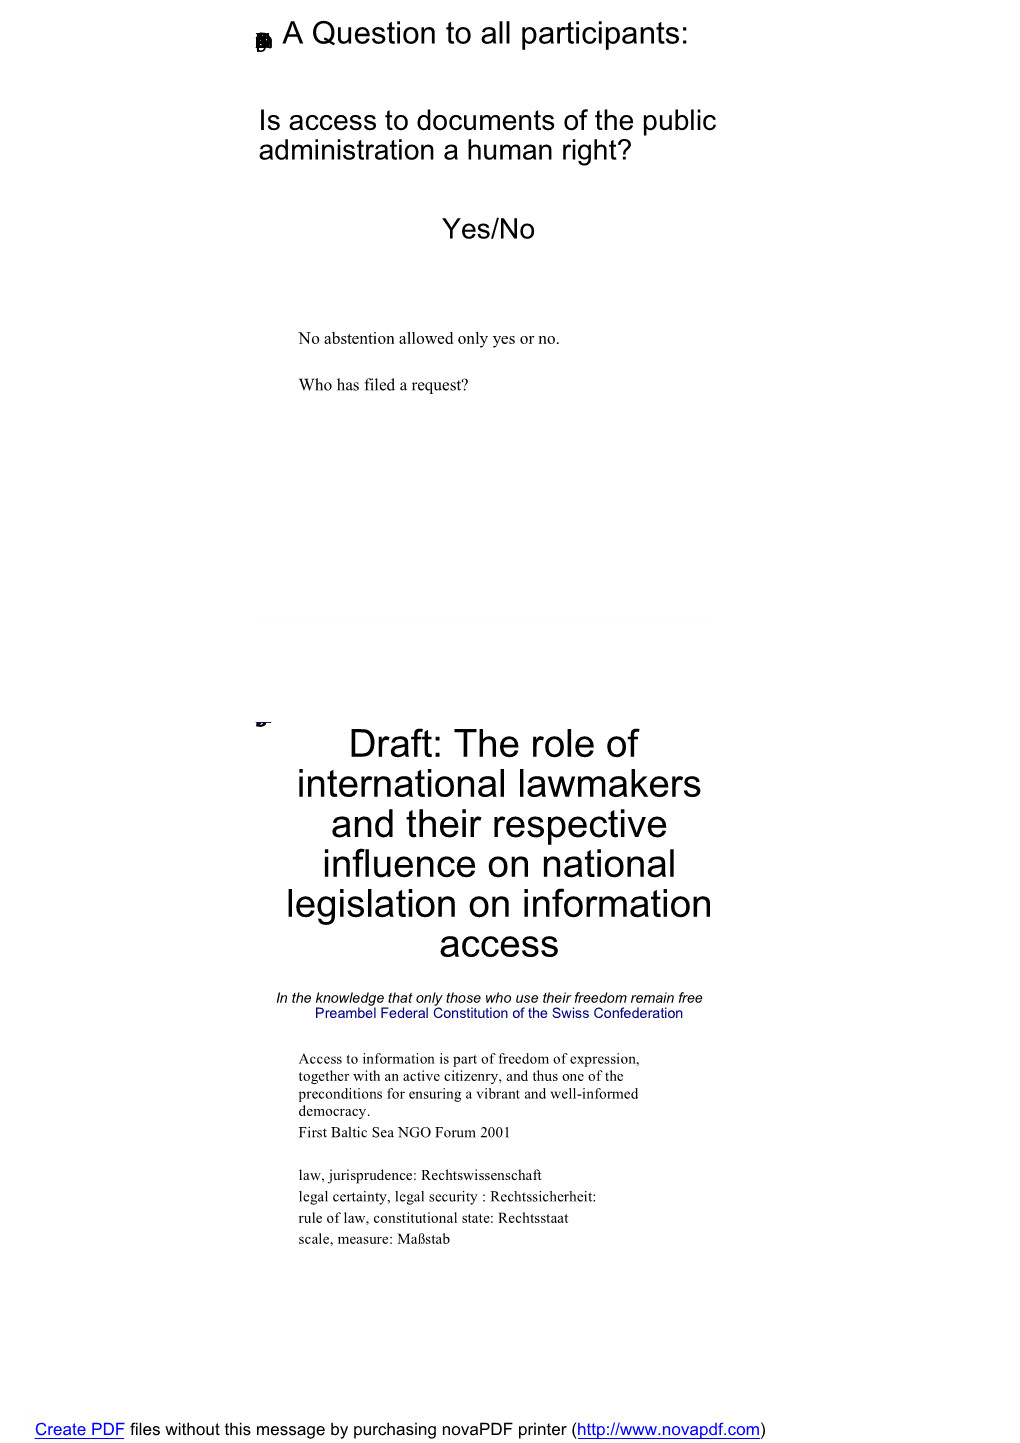 Draft: the Role of International Lawmakers and Their Respective Influence on National Legislation on Information Access